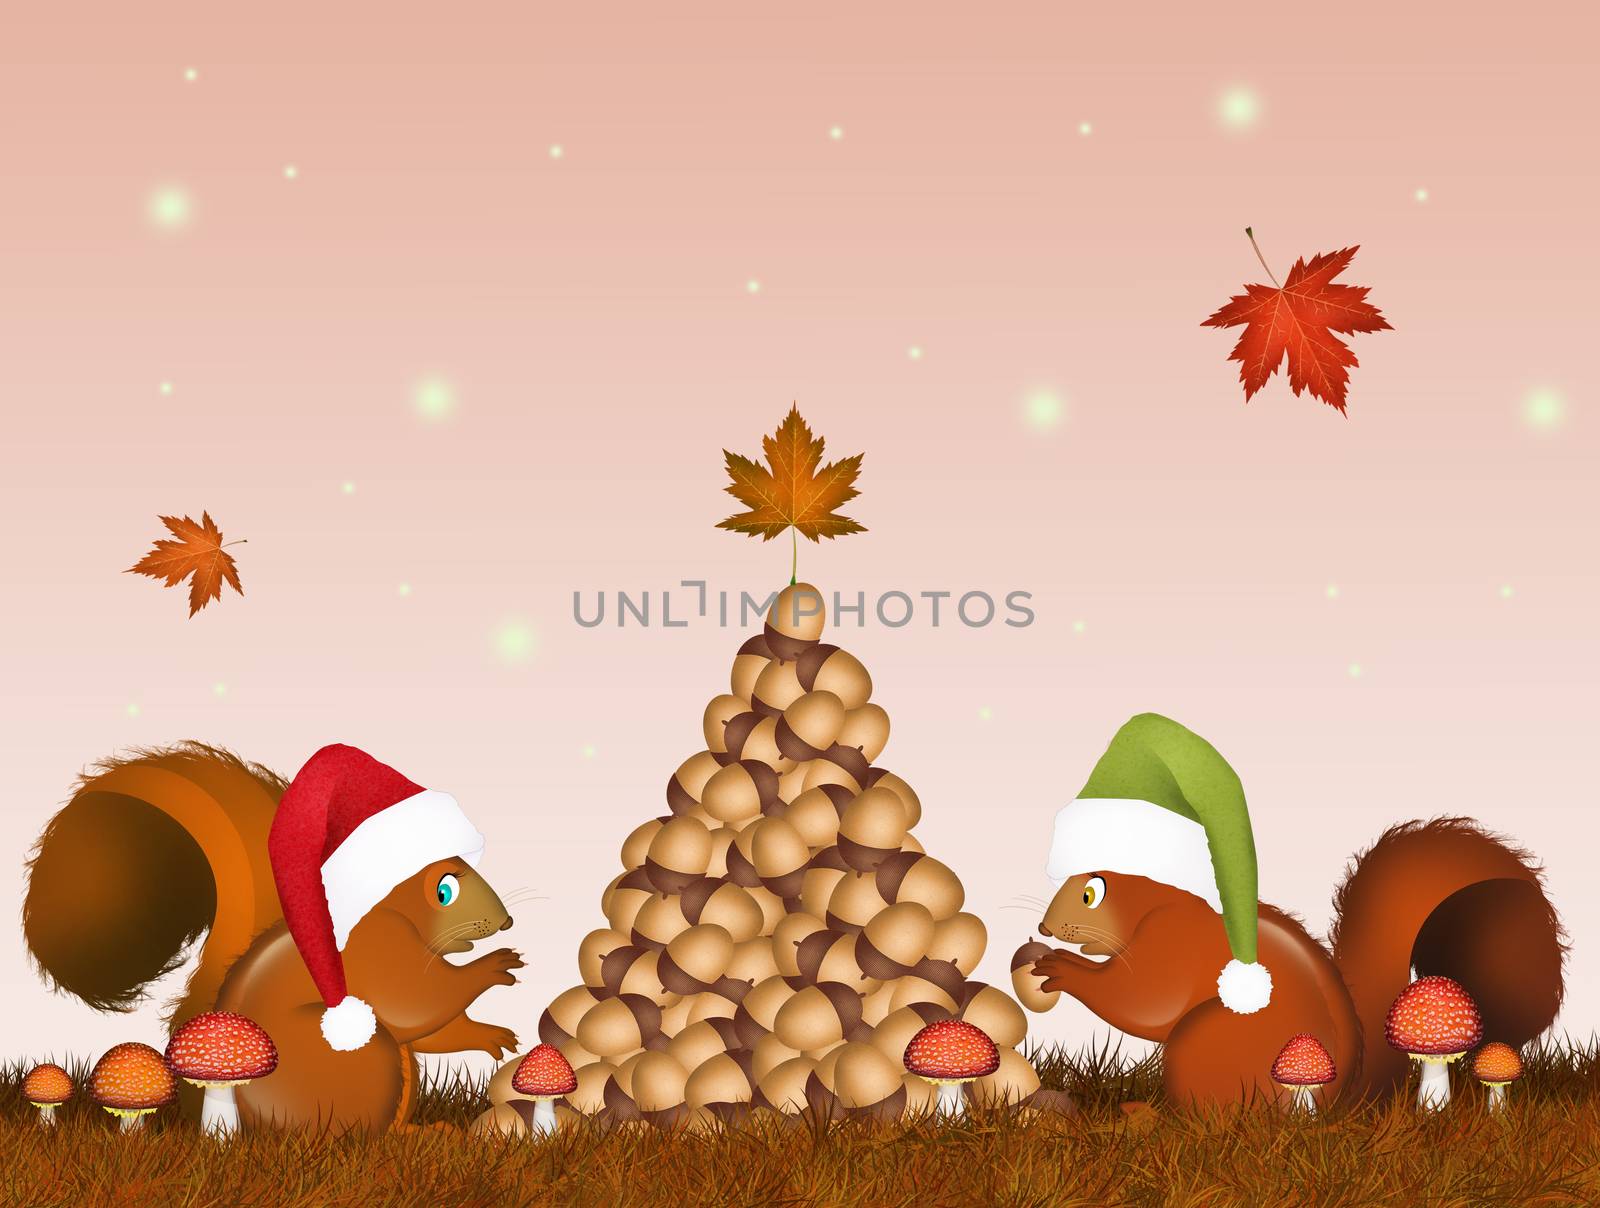 illustration of postcard for Christmas with Christmas squirrels make tree with acorns